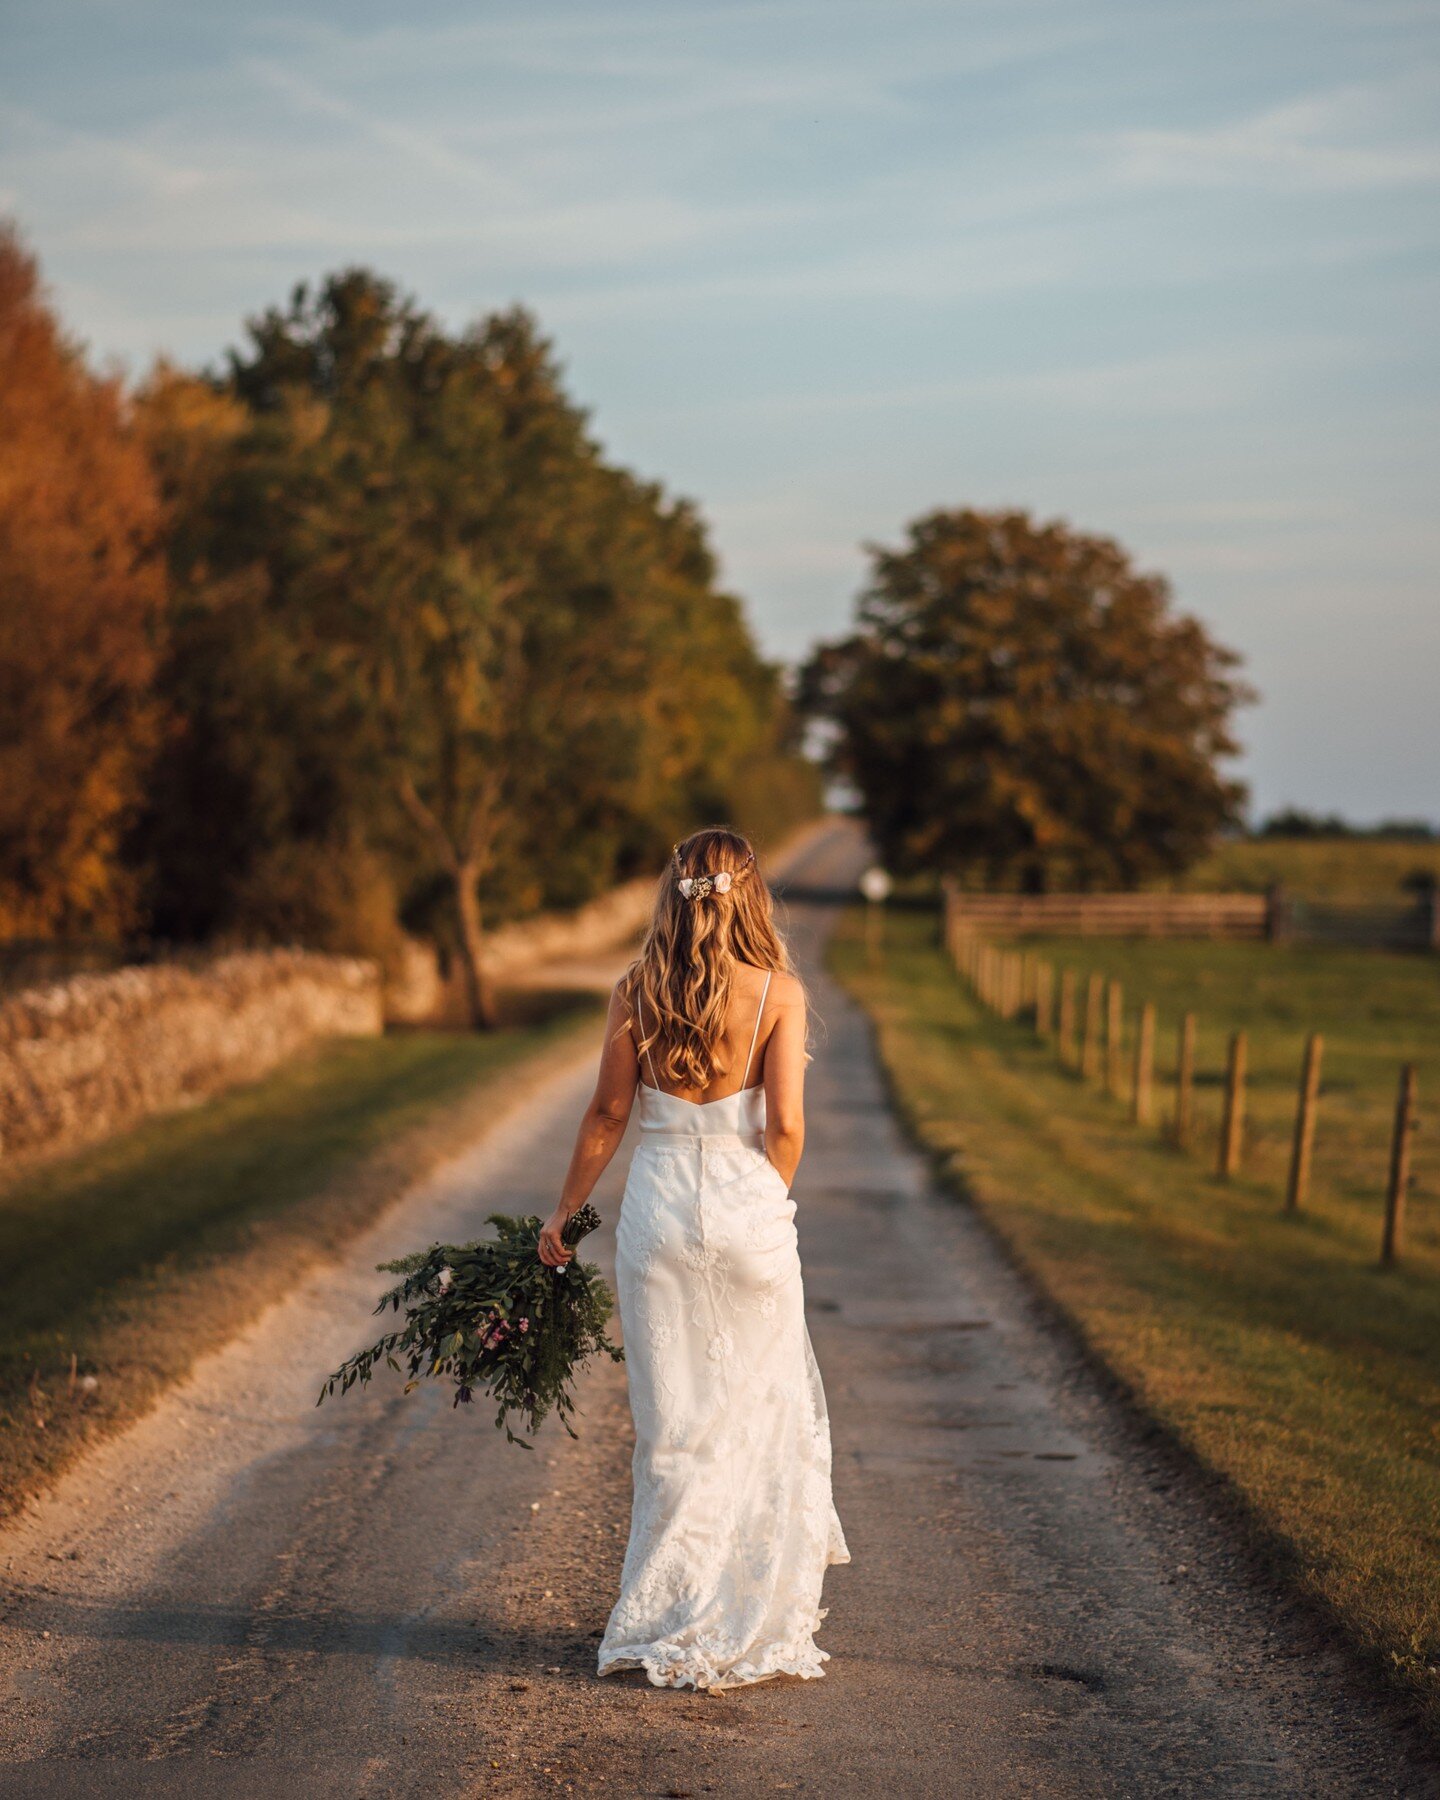 No Oxleaze wedding is complete without the obligatory drive photo and goodness isn't this a beauty. 💗 

📷 @theshannons.photography 
💕 S&amp;O

#farmdrive #countrydrive #weddingphotography #beautifulbride #weddinginspo #countrywedding #oxleazebarn 